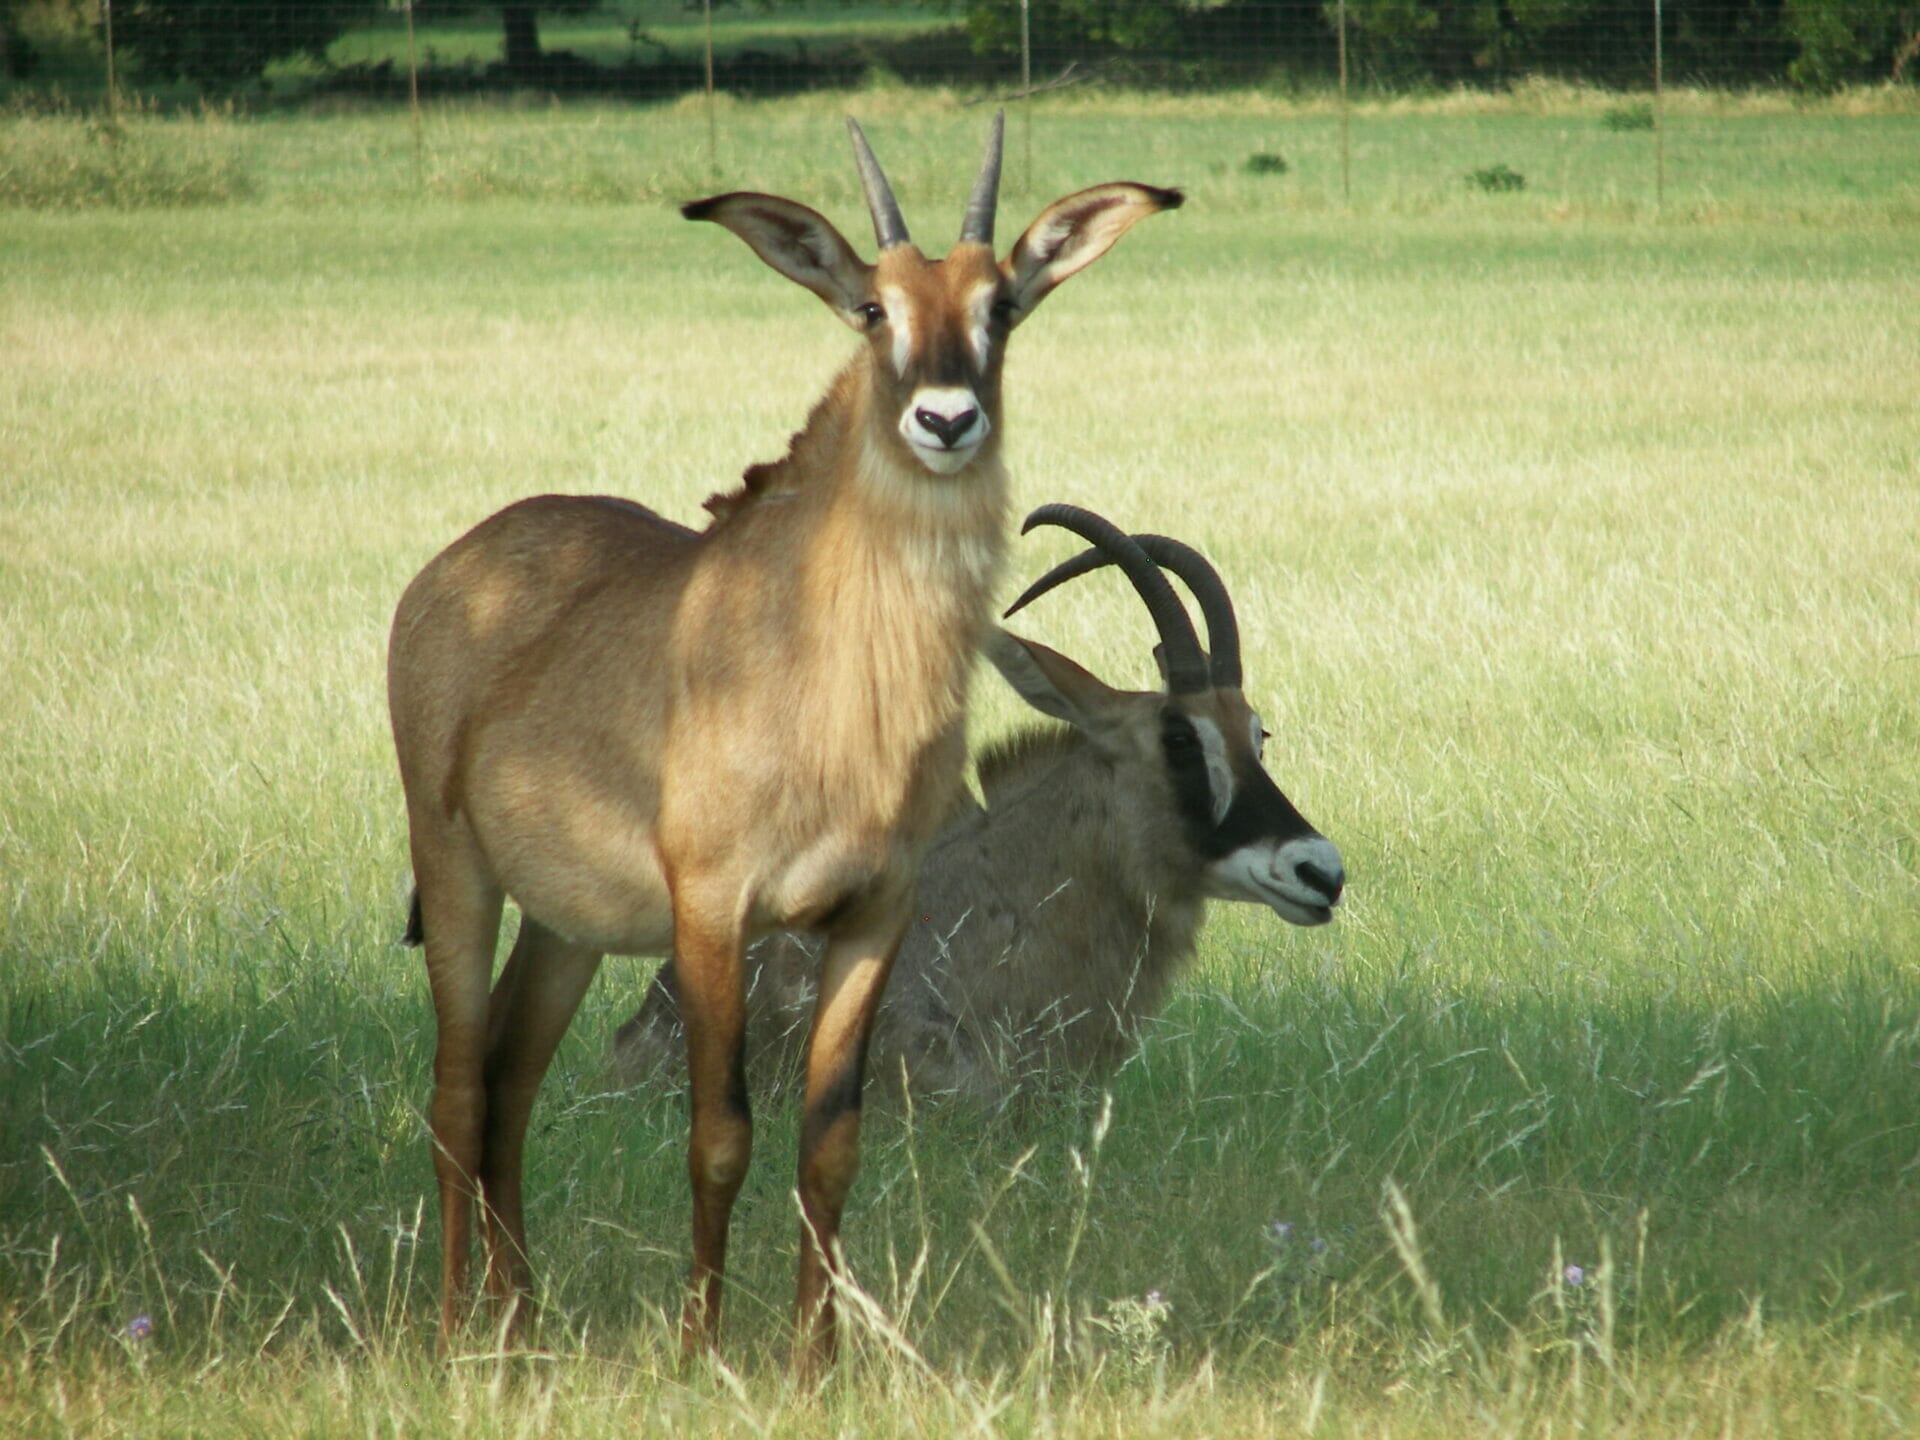 The image contains Roan antelope are one of several species of ruminants housed at Fossil Rim that can be affected by Haemonchus worms.  